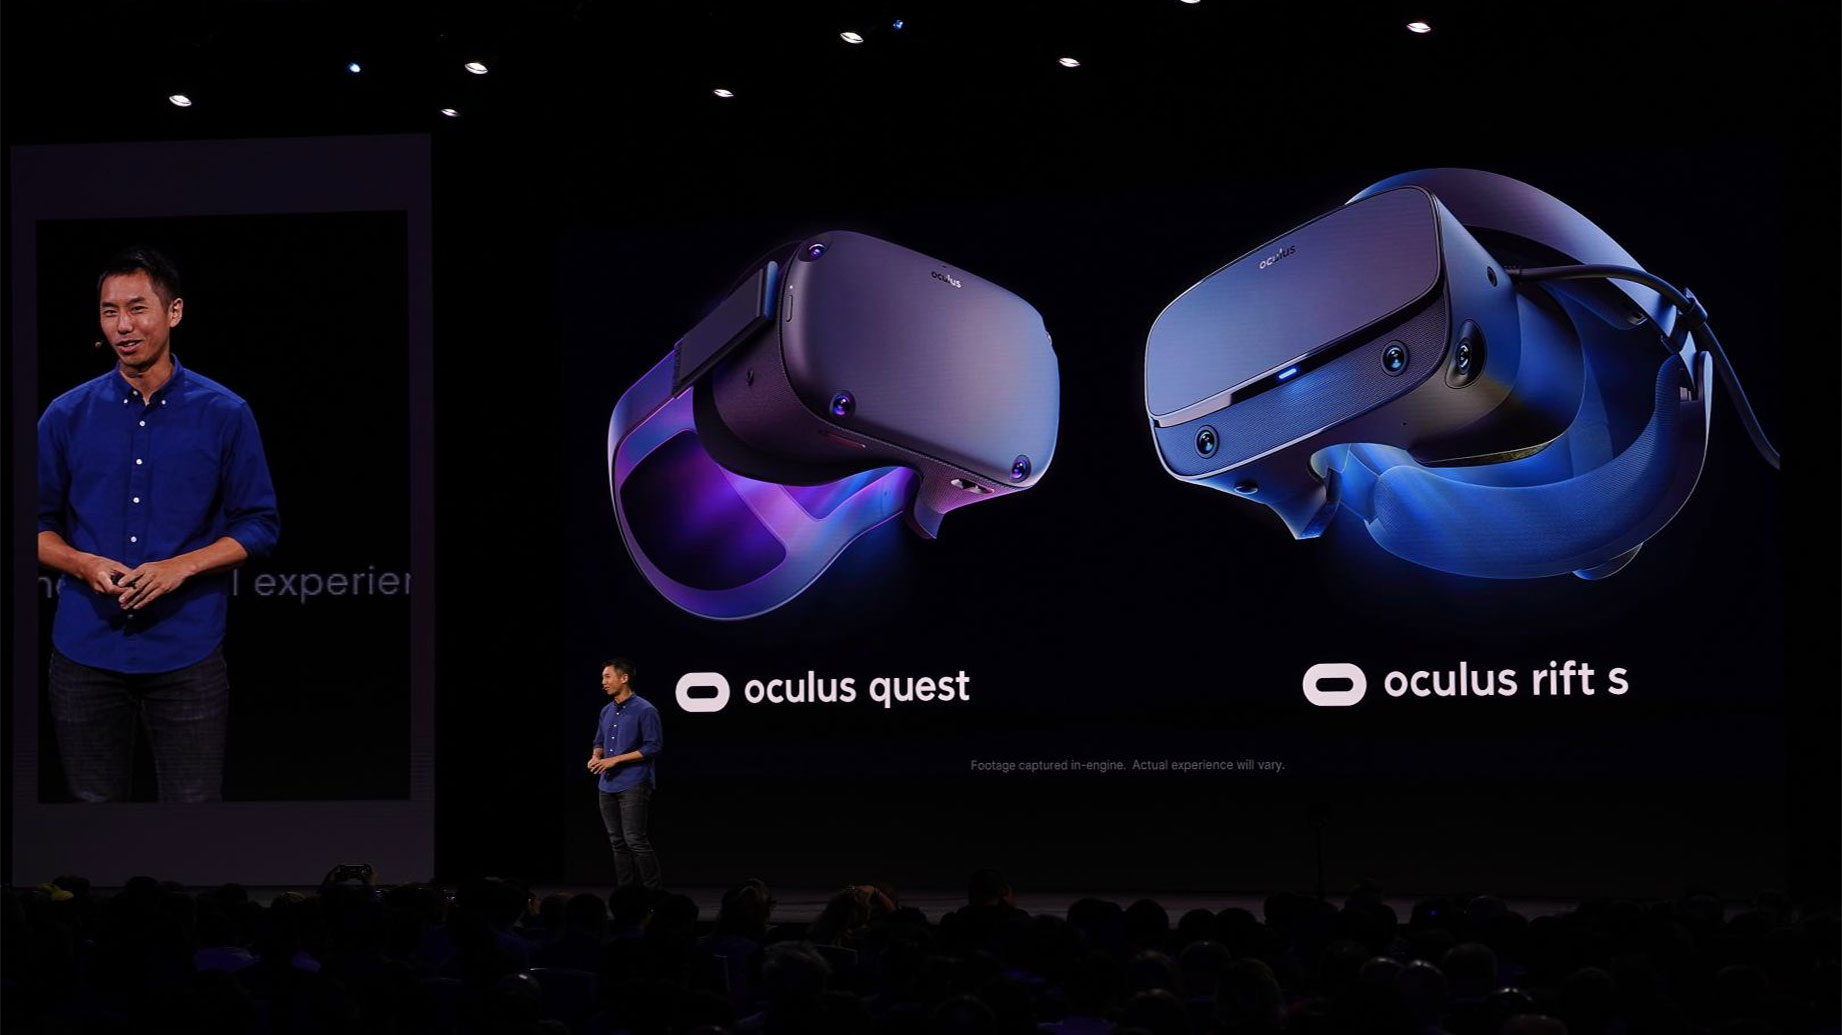 Facebook’s Sean Liu: we are at an inflection point of the VR industry